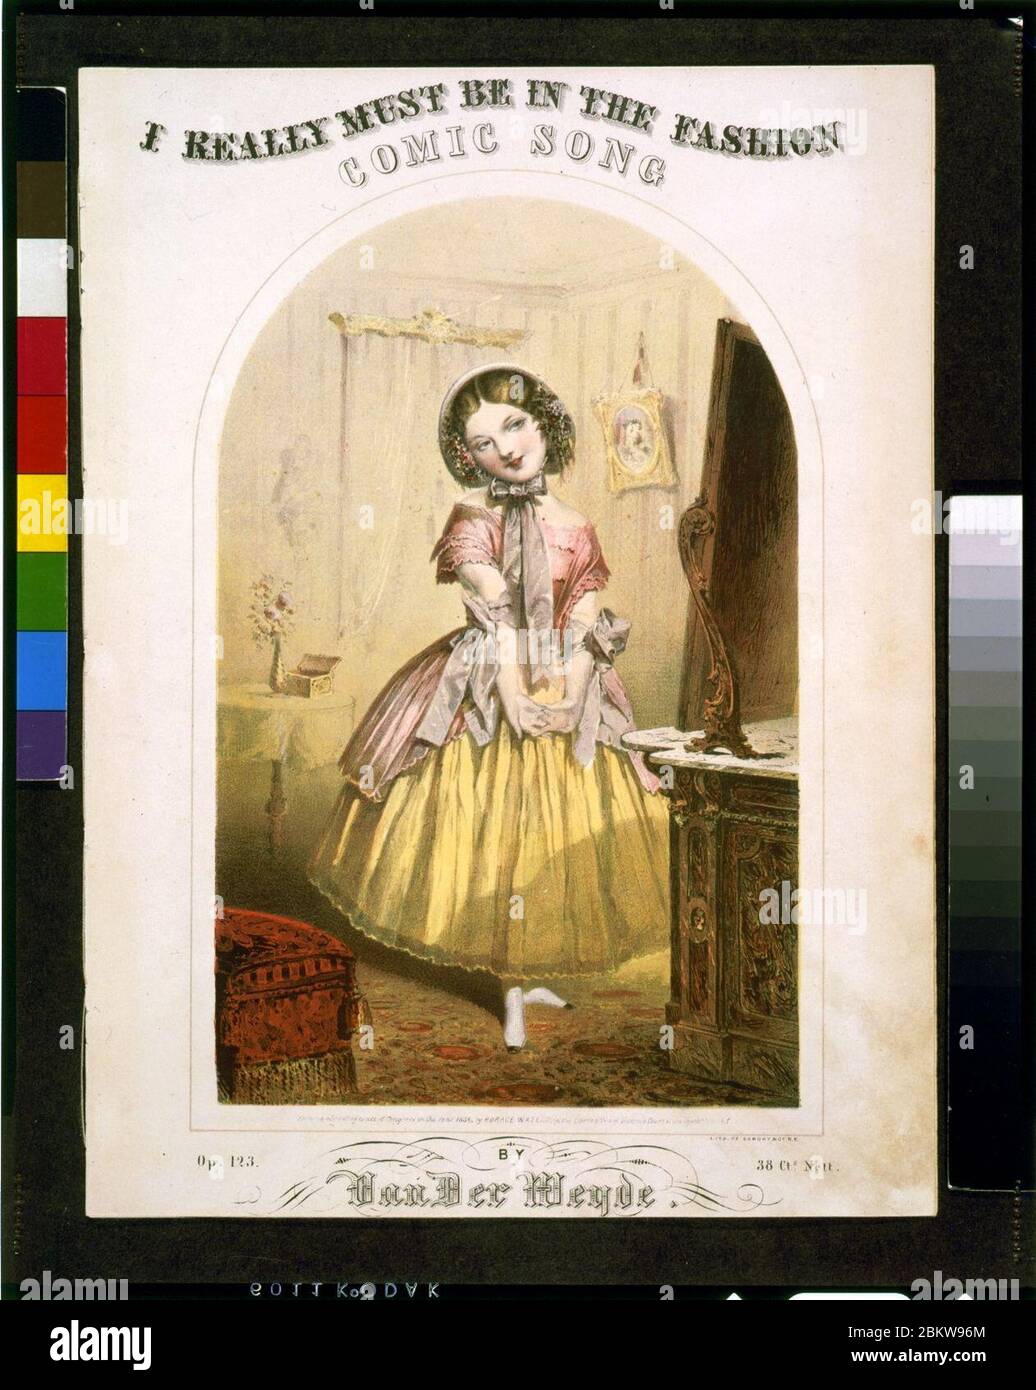 I really must be in the fashion, comic song, by Van Der Weyde - lith. of Sarony & Co., N.Y. Stock Photo